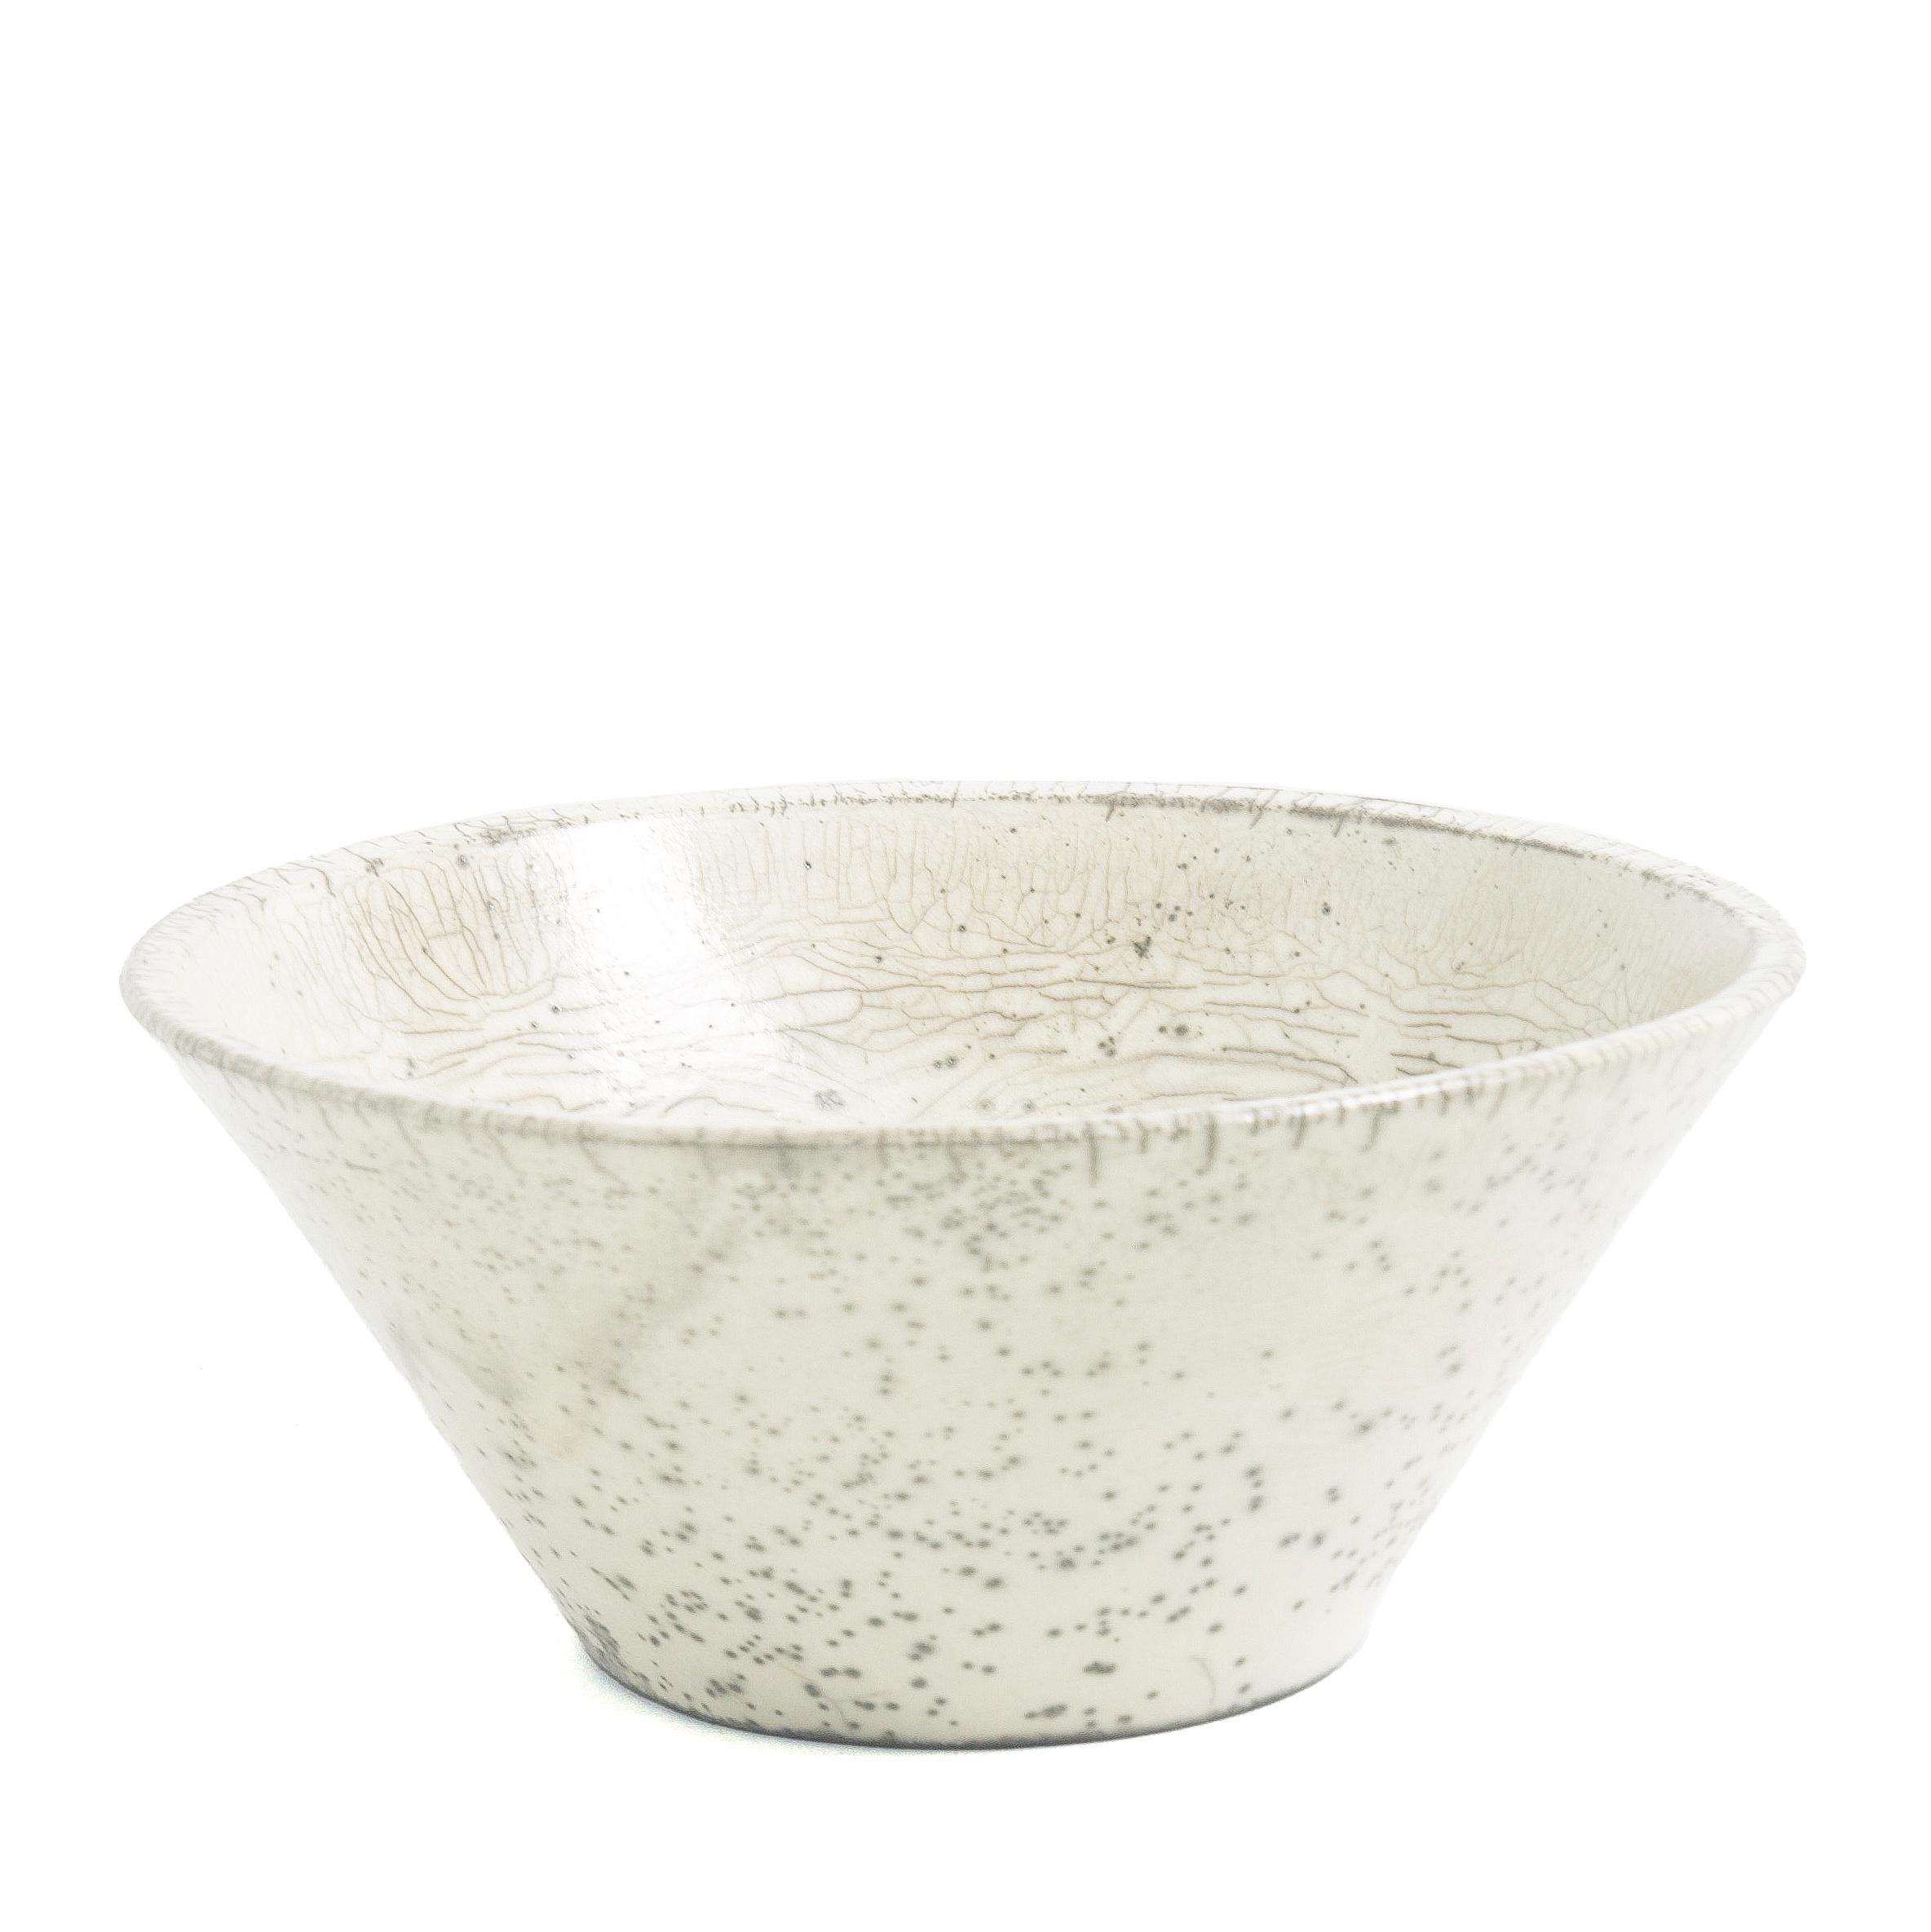 Japanese Minimalistic LAAB Moon Set of 4 Bowls Raku Ceramics Crackle White In New Condition For Sale In monza, Monza and Brianza